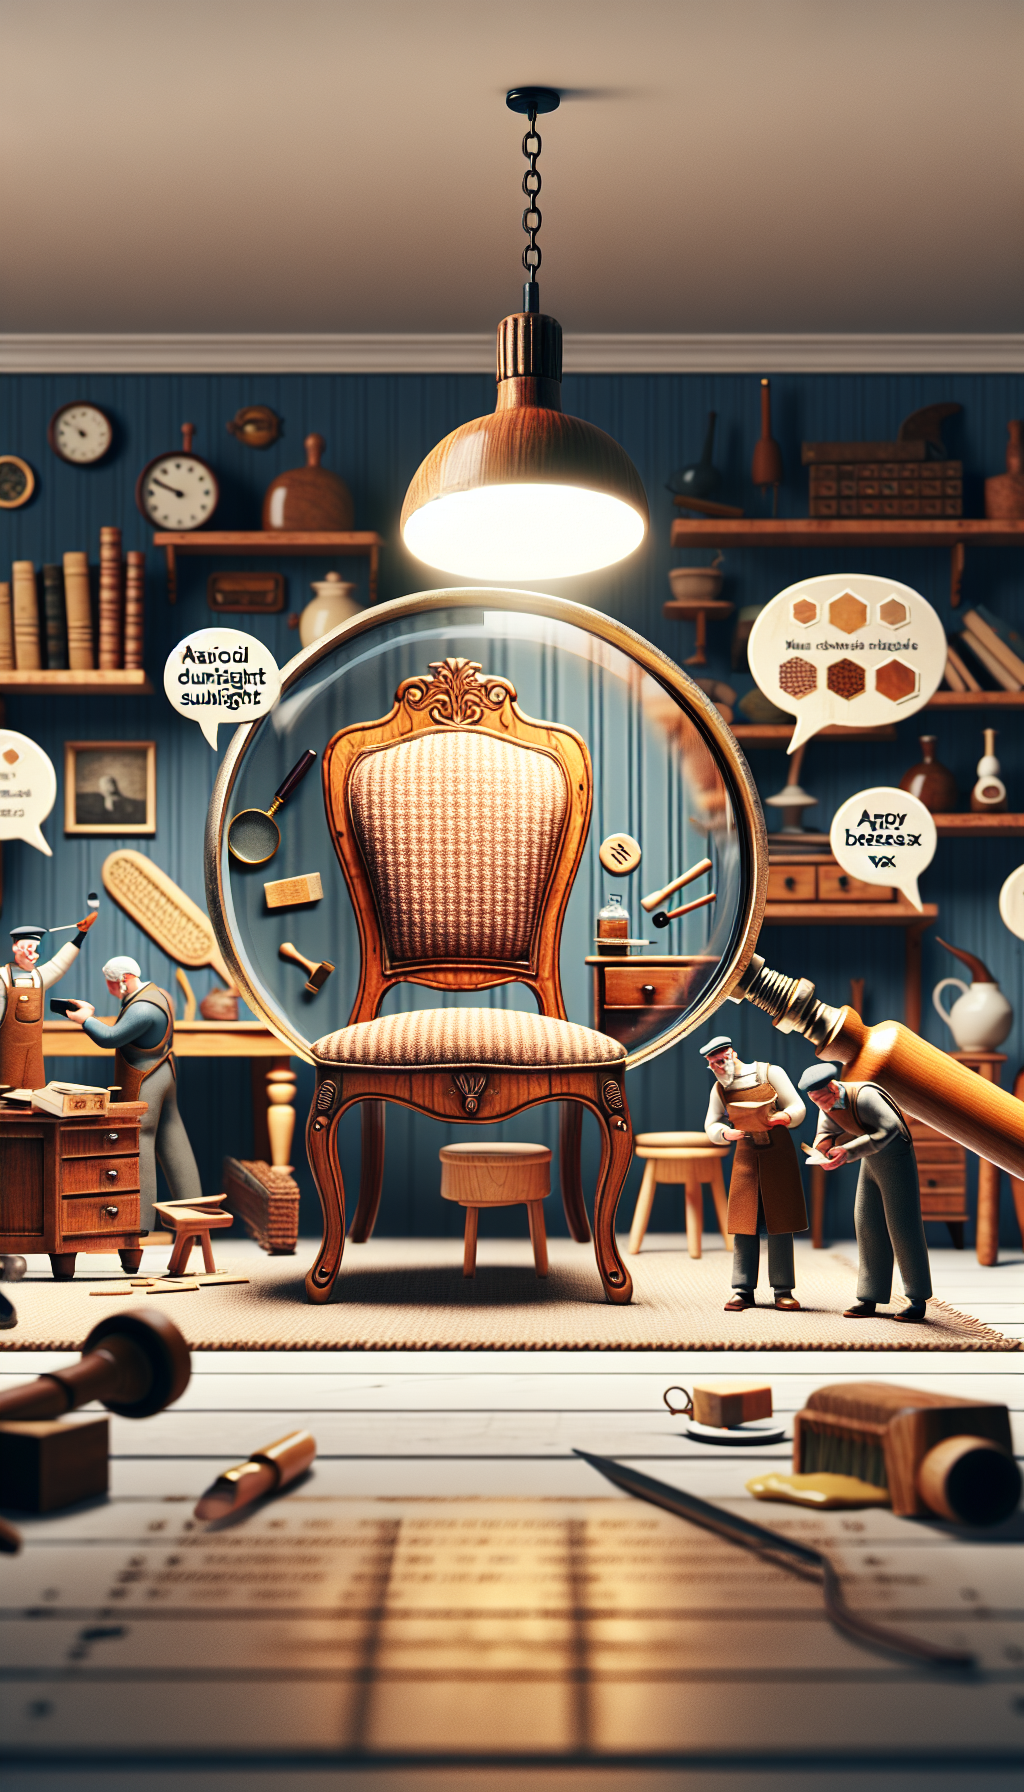 An illustration of a cozy vintage study, where a magnifying glass hovers over an elegant antique chair, revealing its grain and maker's marks. Around the room, animated tiny woodworkers busily polish surfaces and repair joints on various pieces, meanwhile, bubble-like text boxes pop with succinct care tips like "No Direct Sunlight" or "Use Beeswax". The eclectic image melds meticulous detail and playful caricature.